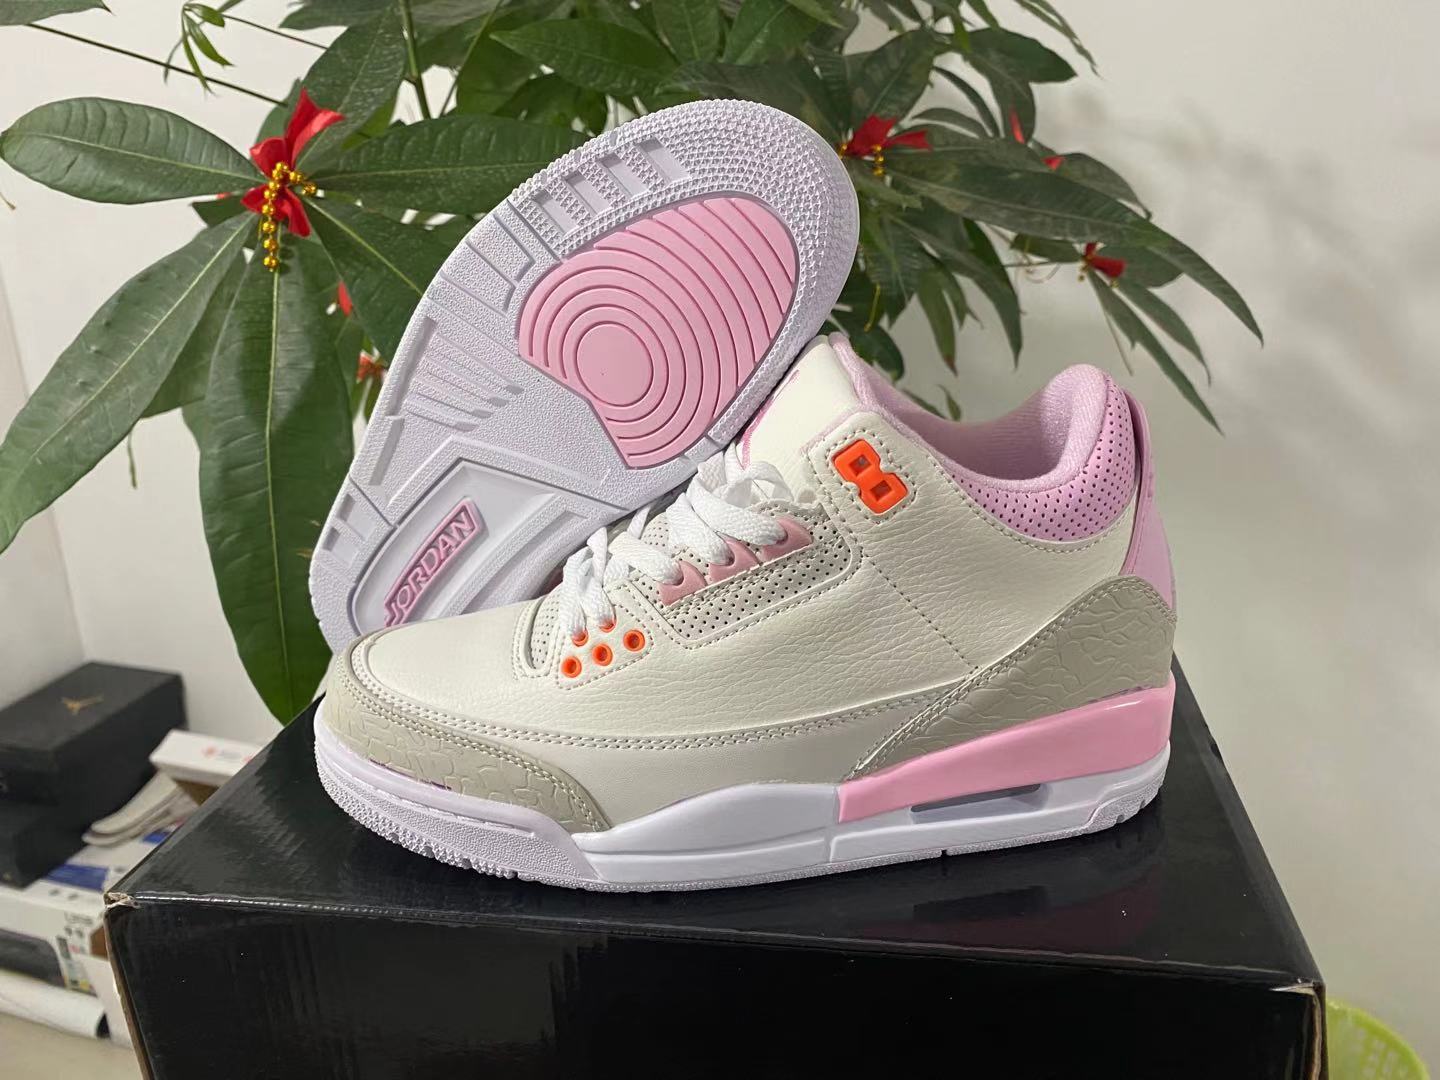 New Air Jordan 3 Retro White Pink Cement Shoes - Click Image to Close